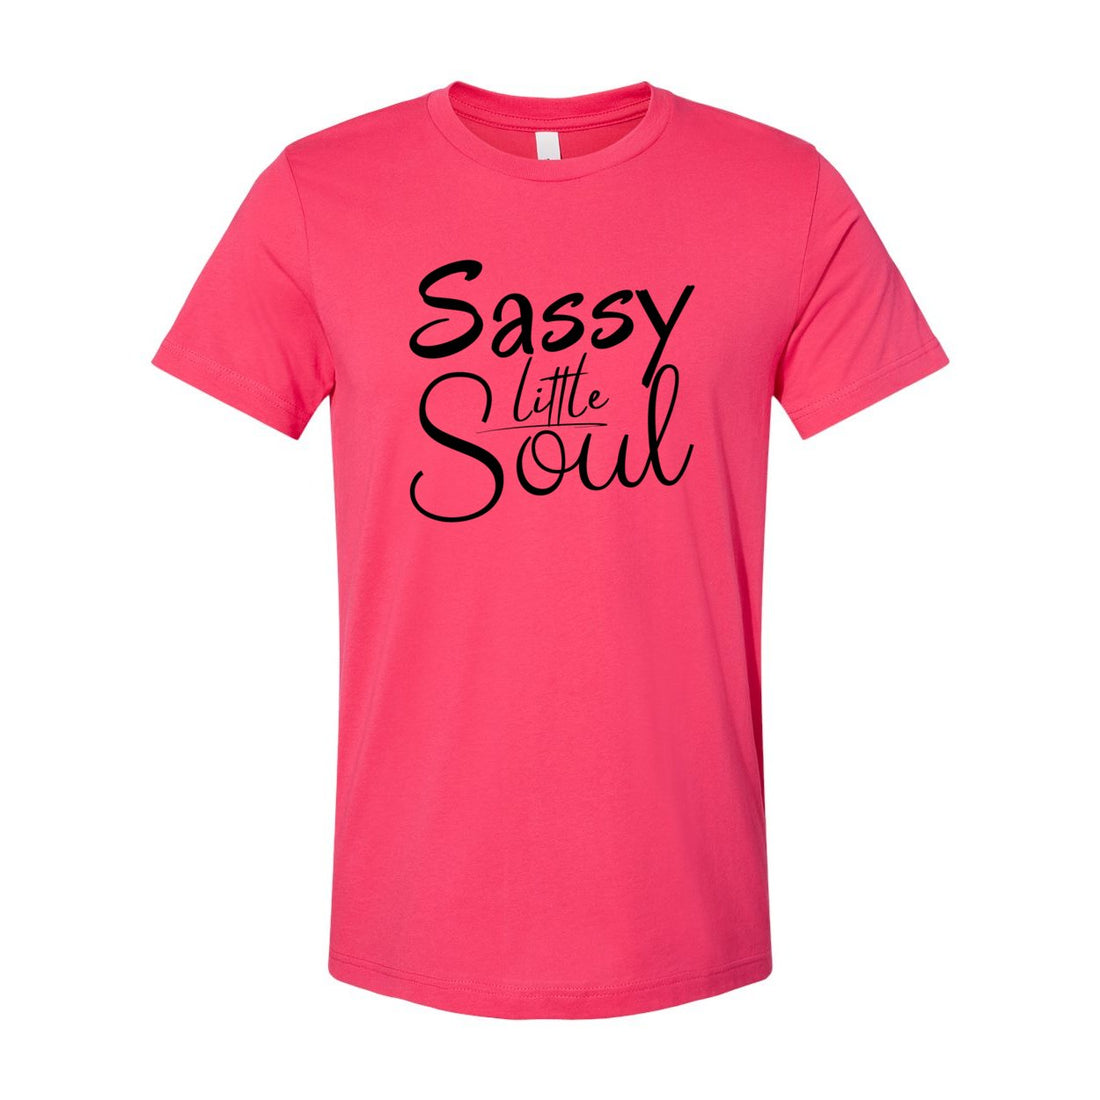 Sassy Soul Jersey Tee - T-Shirts - Positively Sassy - Sassy Soul Jersey Tee